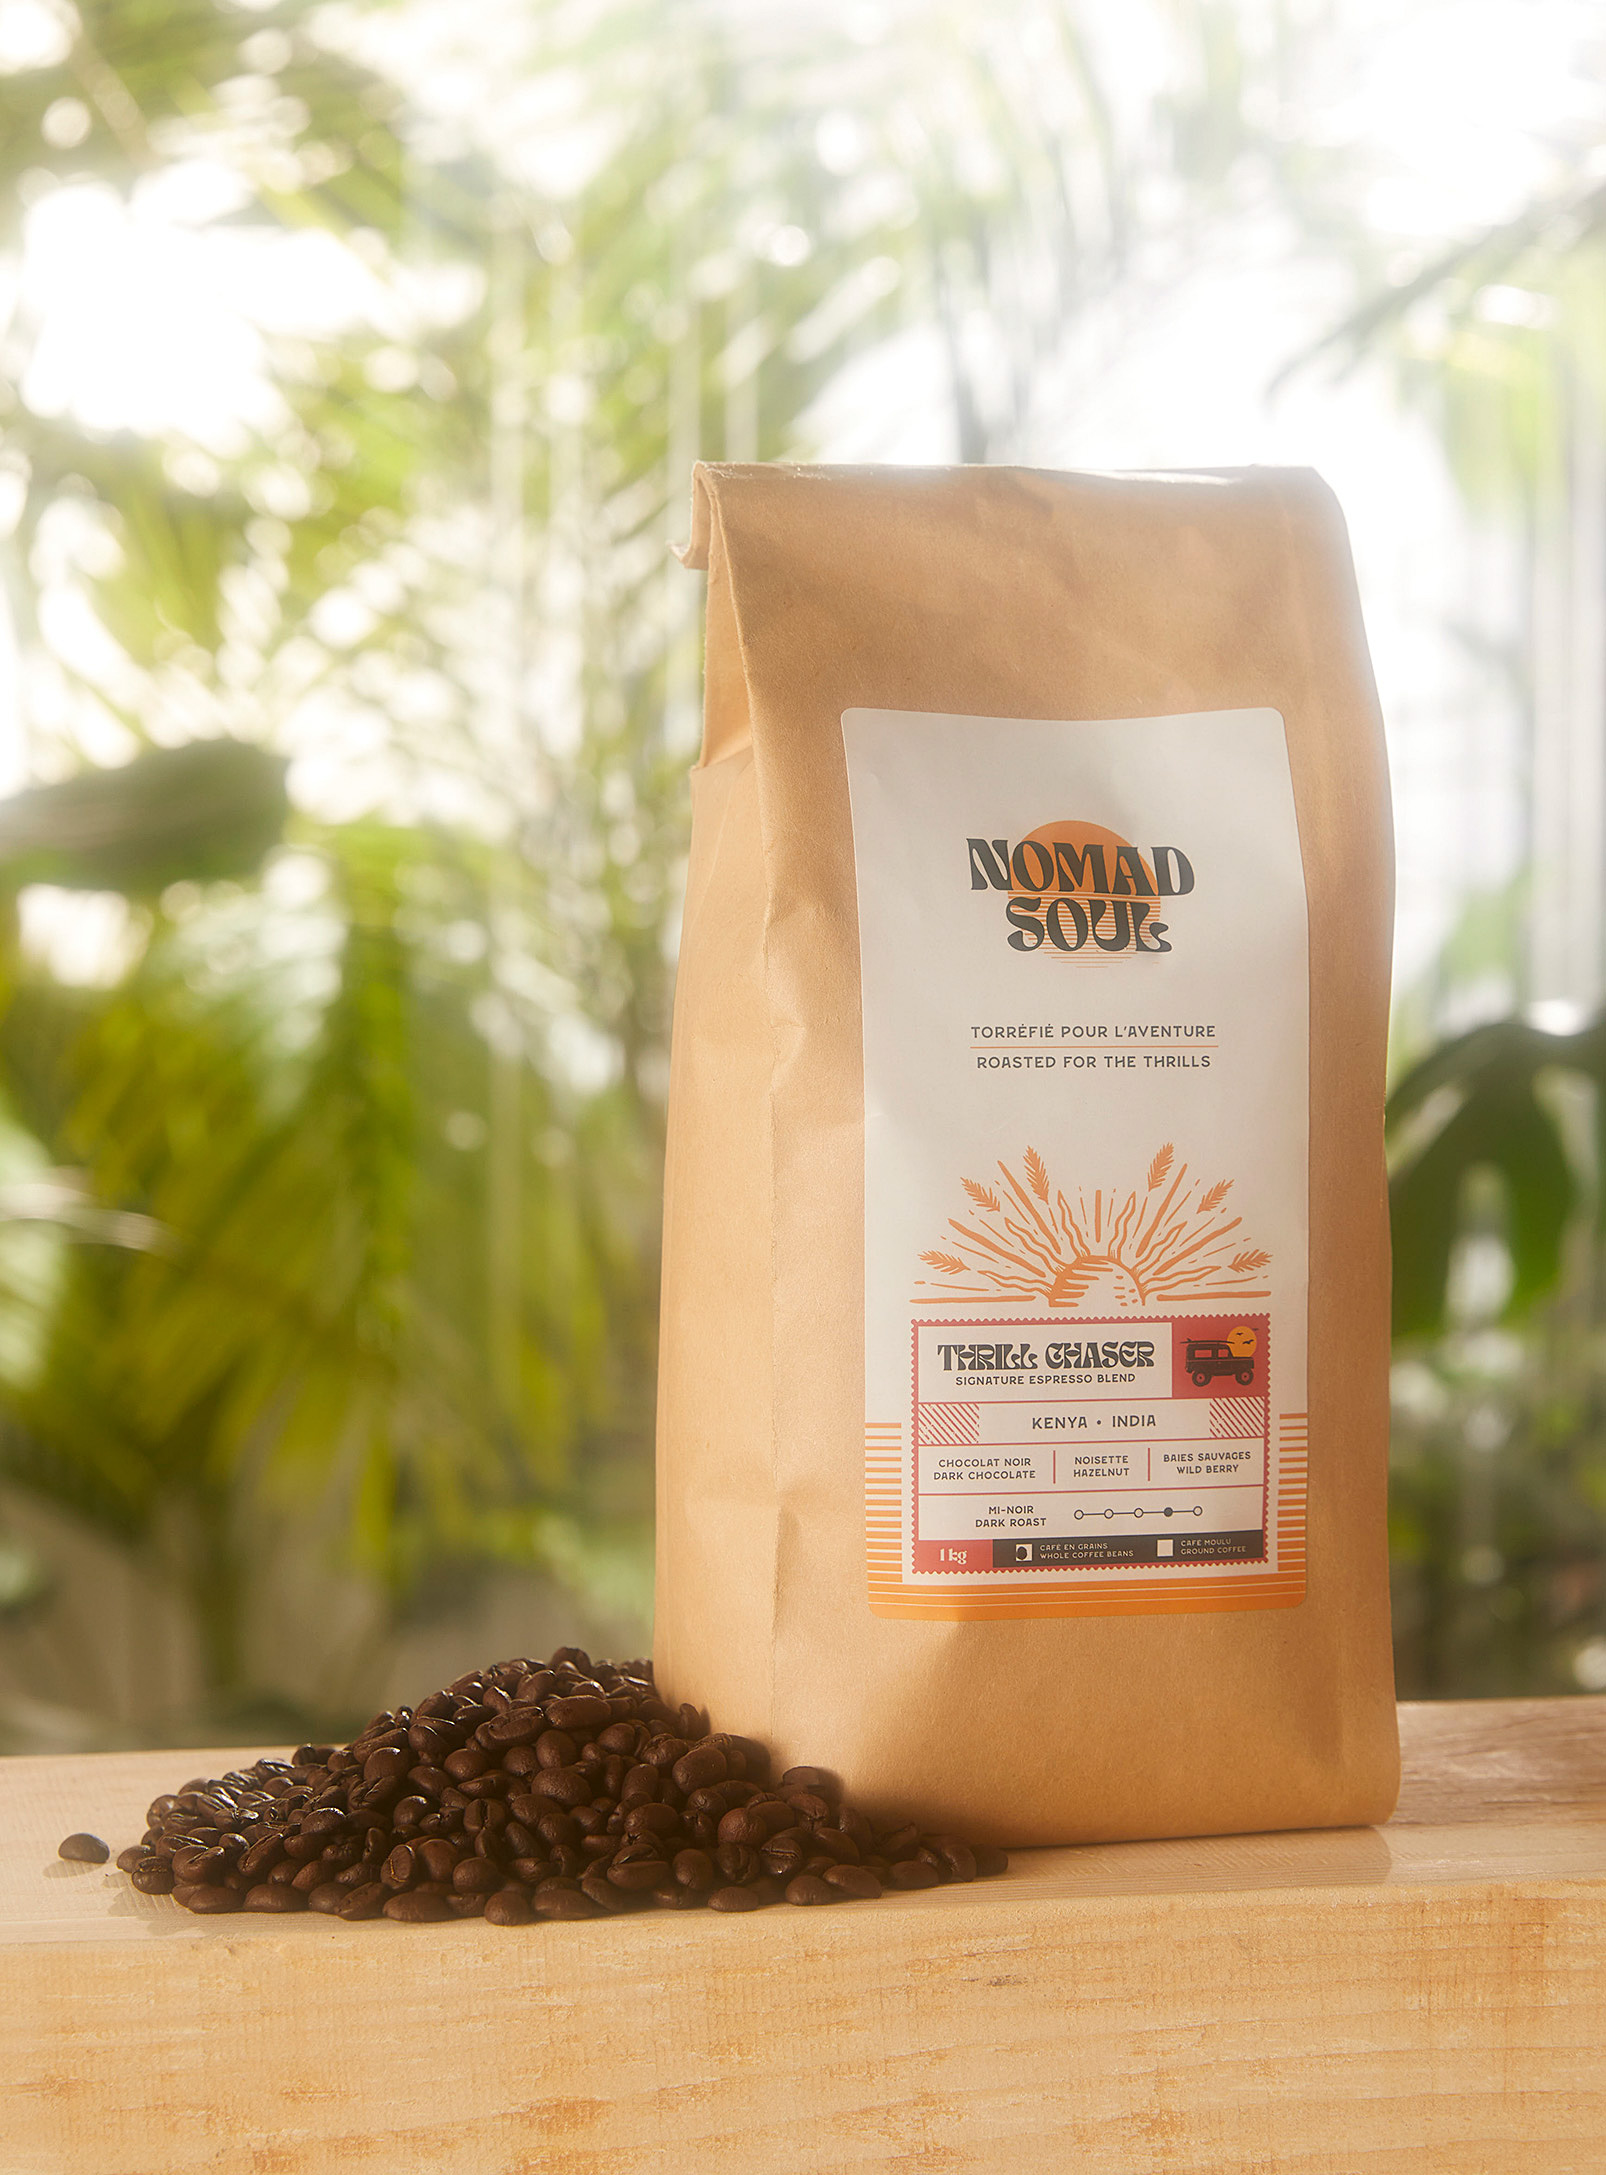 Nomad Soul Coffee Co. - Le café Thrill Chaser grand format